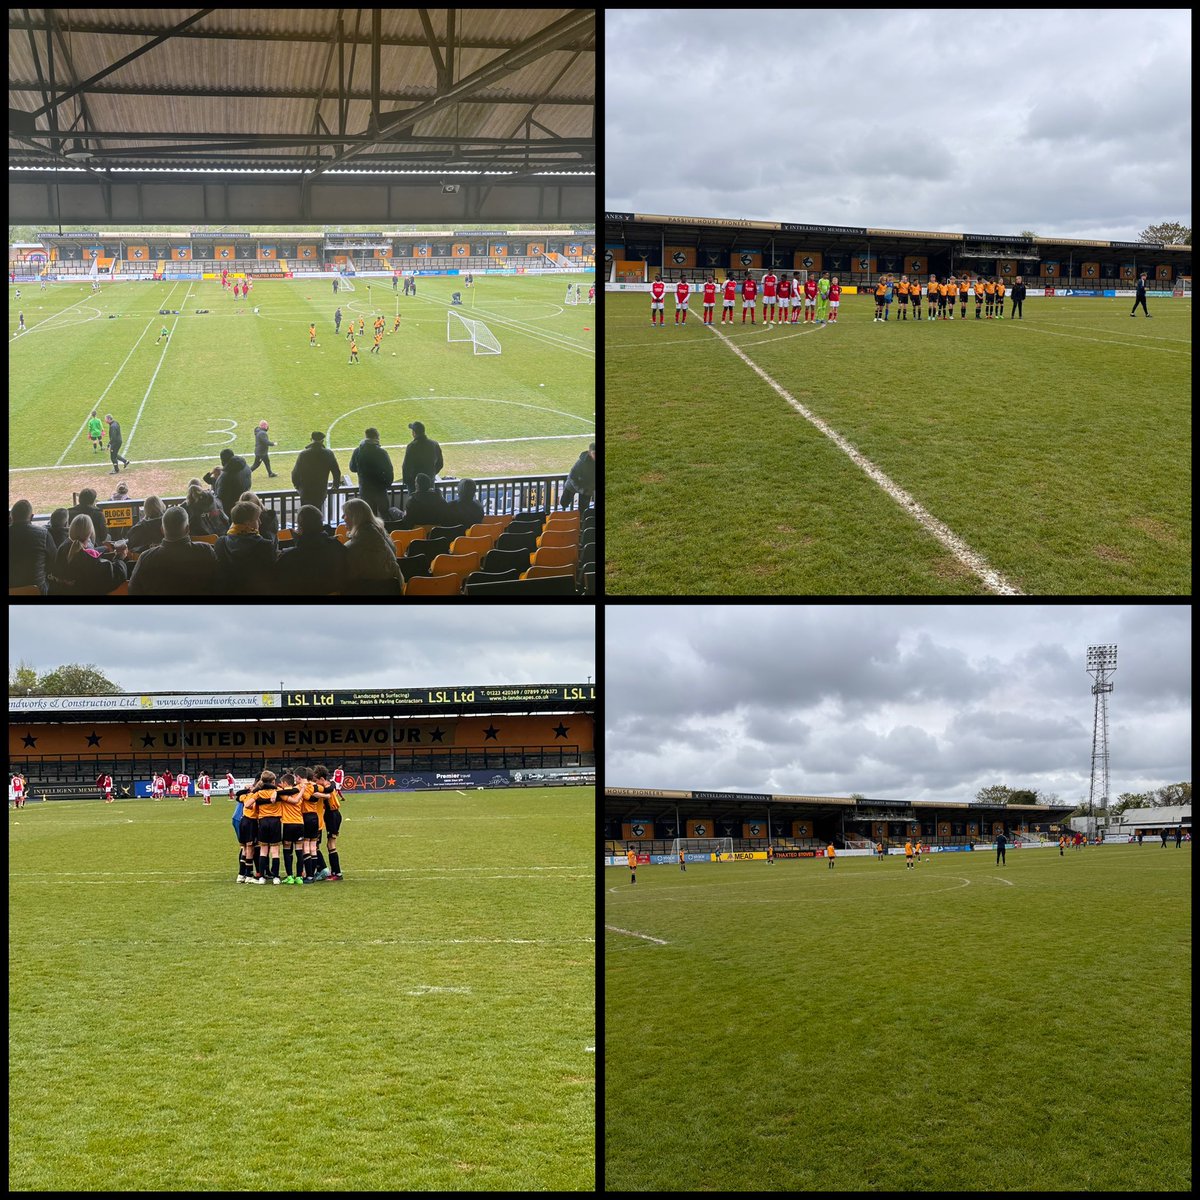 A brilliant day with stadium games vs @ArsenalAcademy @cufcacademy1 #coaching #stadium #announcer bonus the first team stayed up also @CambridgeUtdFC @EFL